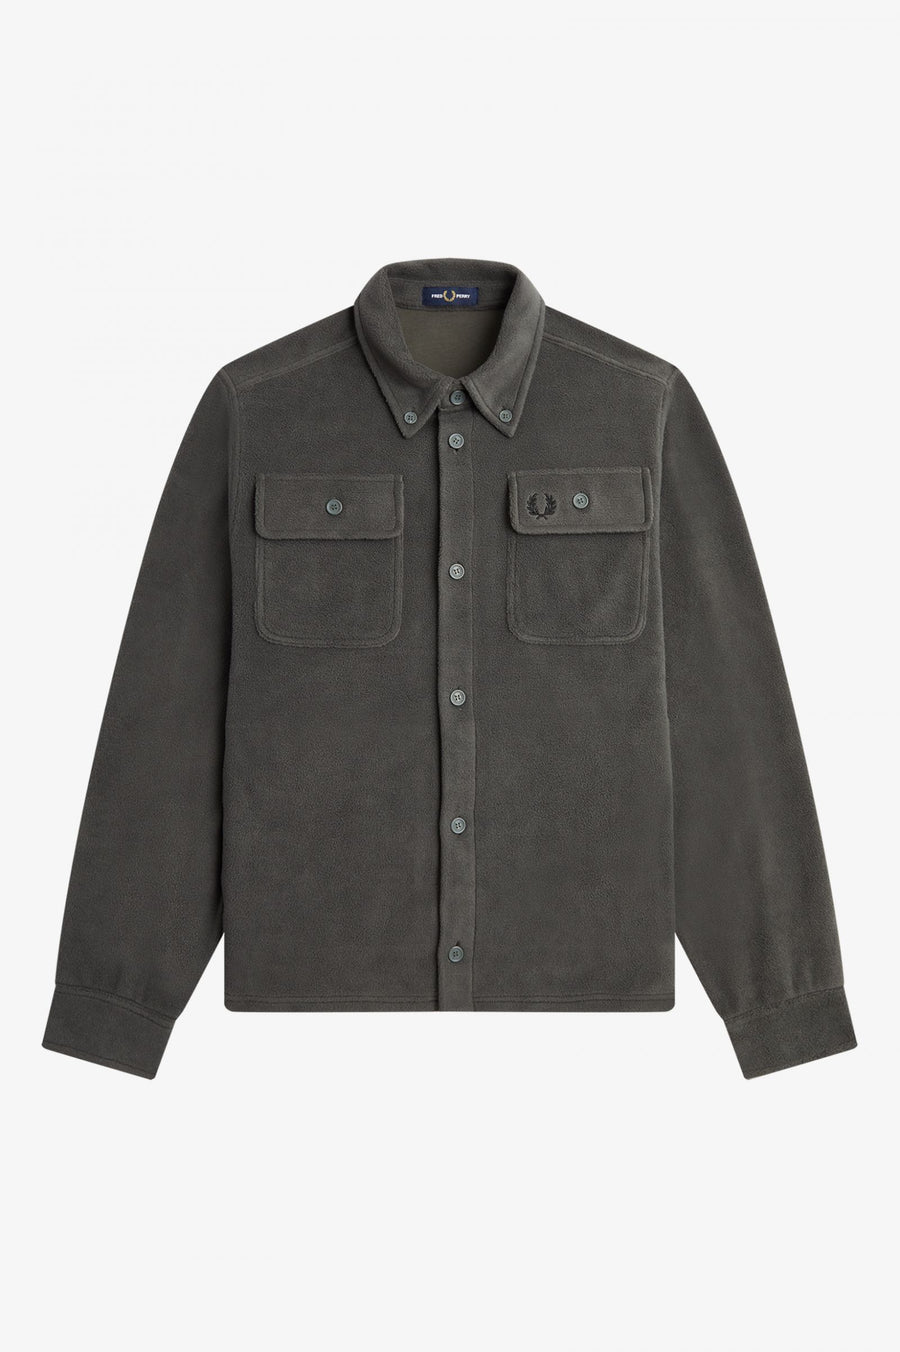 FRED PERRY FLEECE OVERSHIRT - FIELD GREEN – 1st PRODUCT STORE